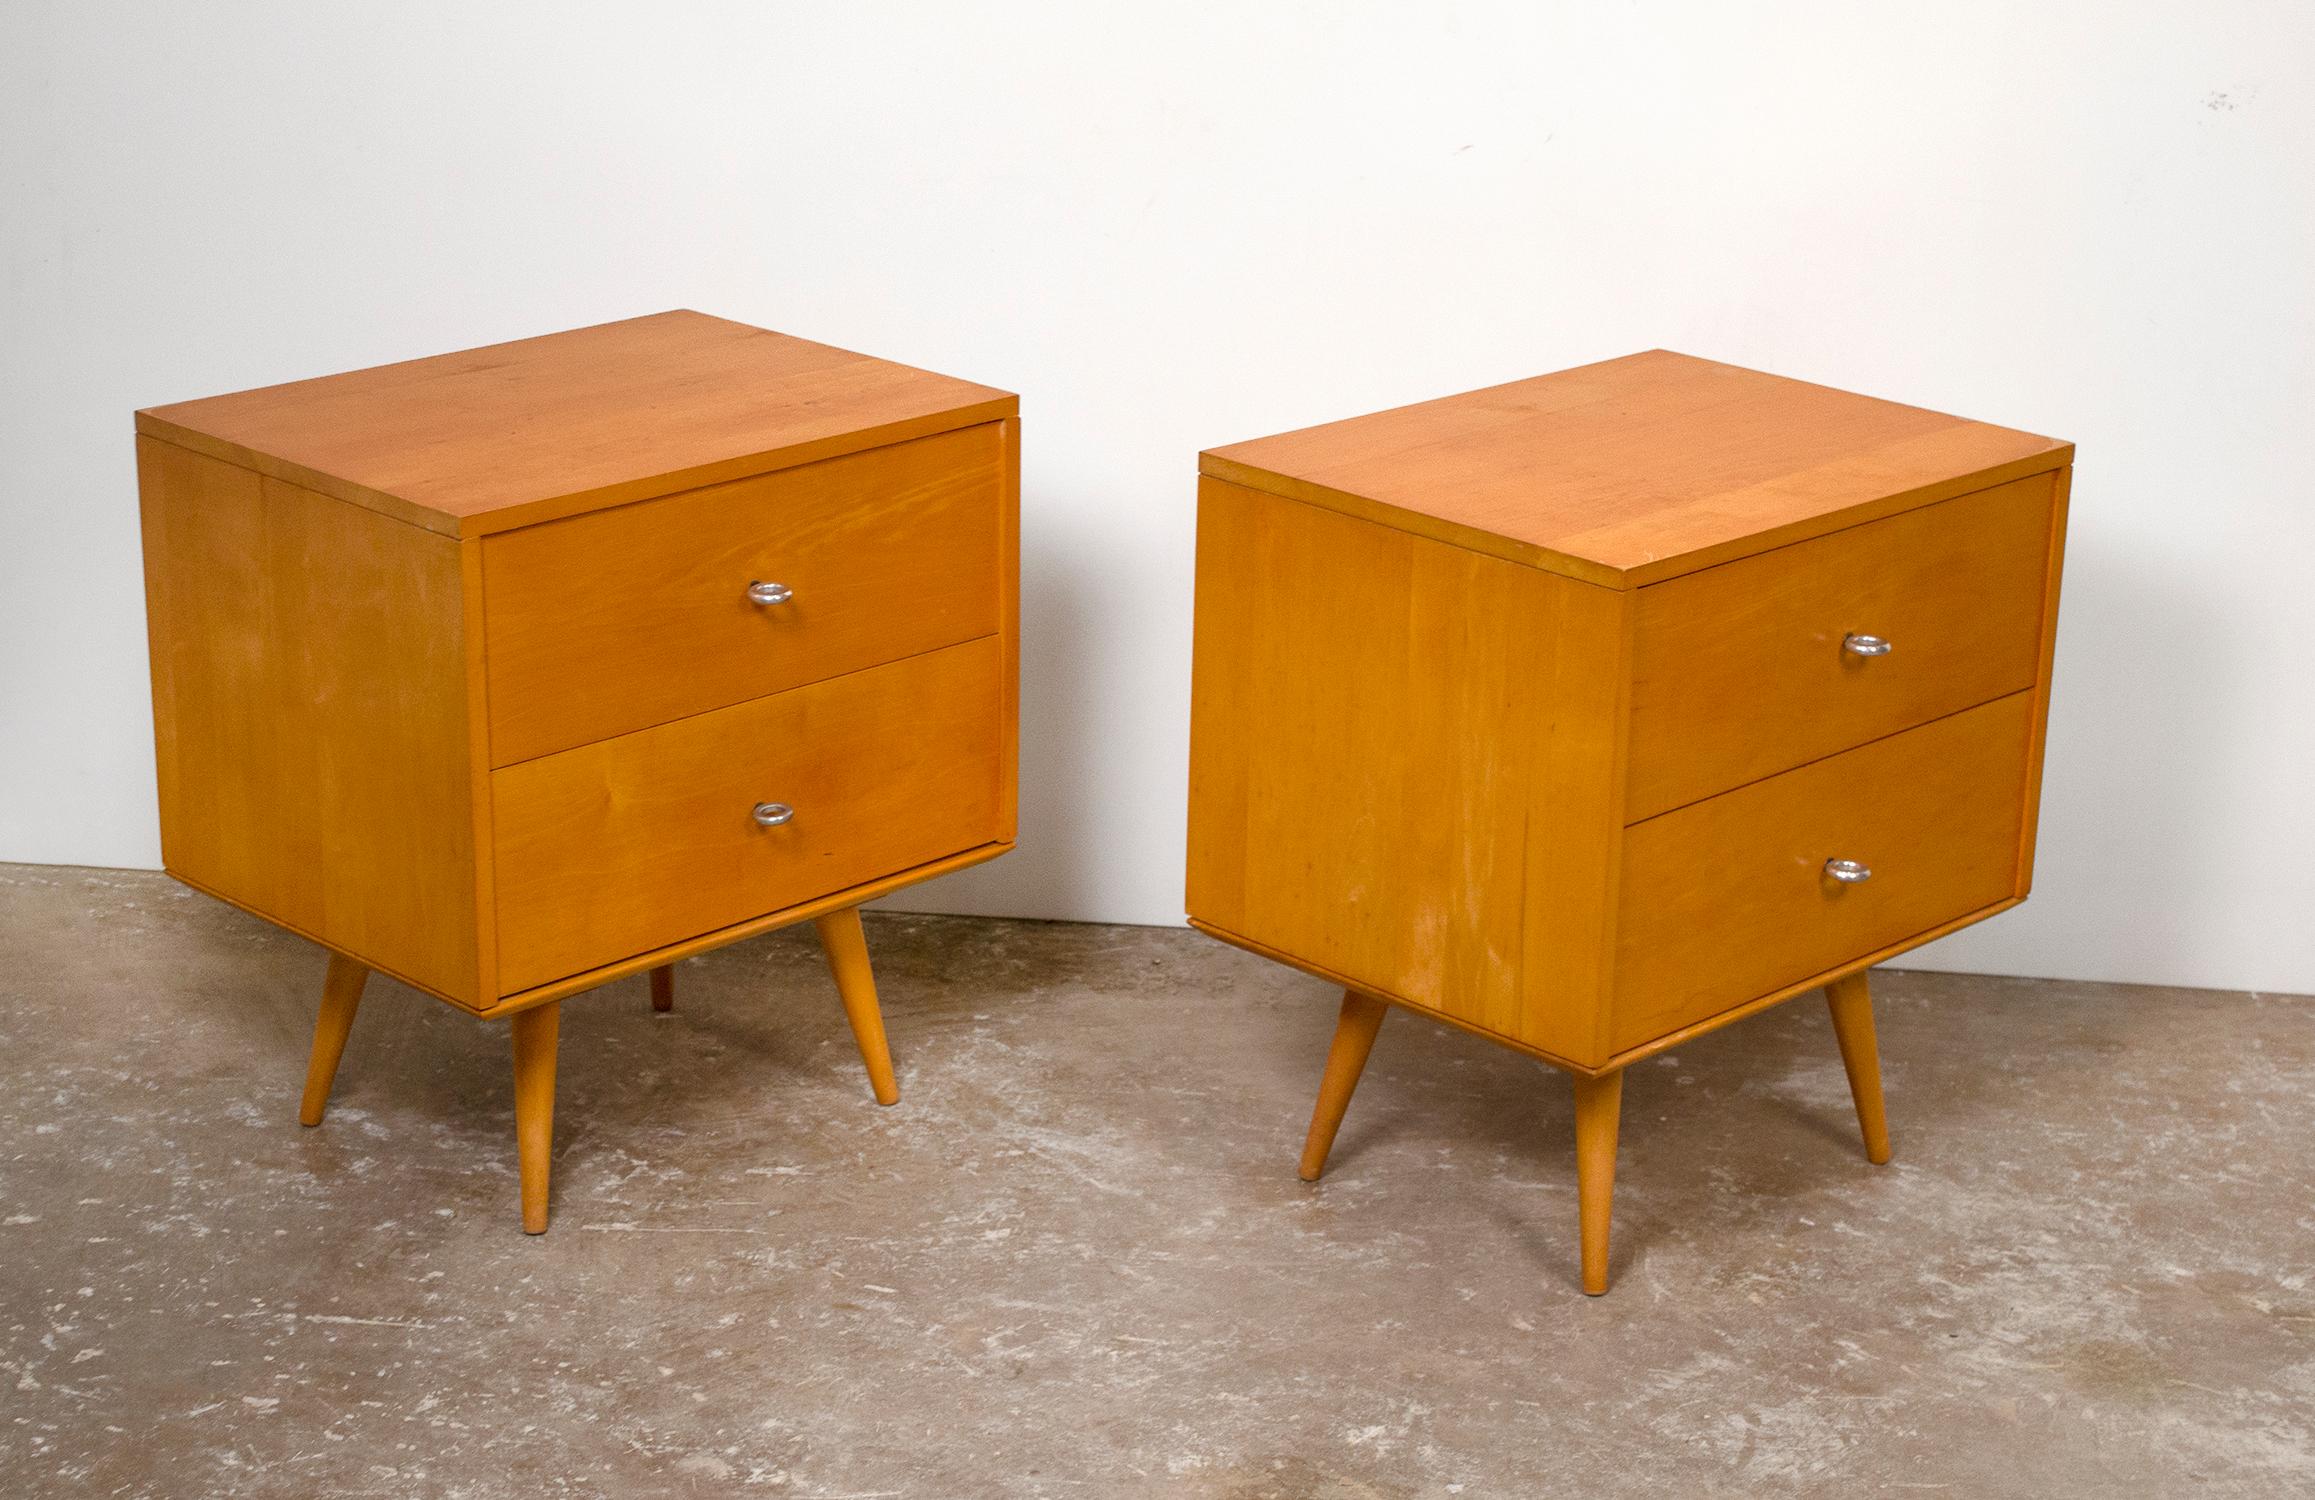 Stunning pair of solid maple Paul McCobb nightstands with original hardware. These cabinets are rock solid and were lightly refreshed. Ultra-modern and indestructible.